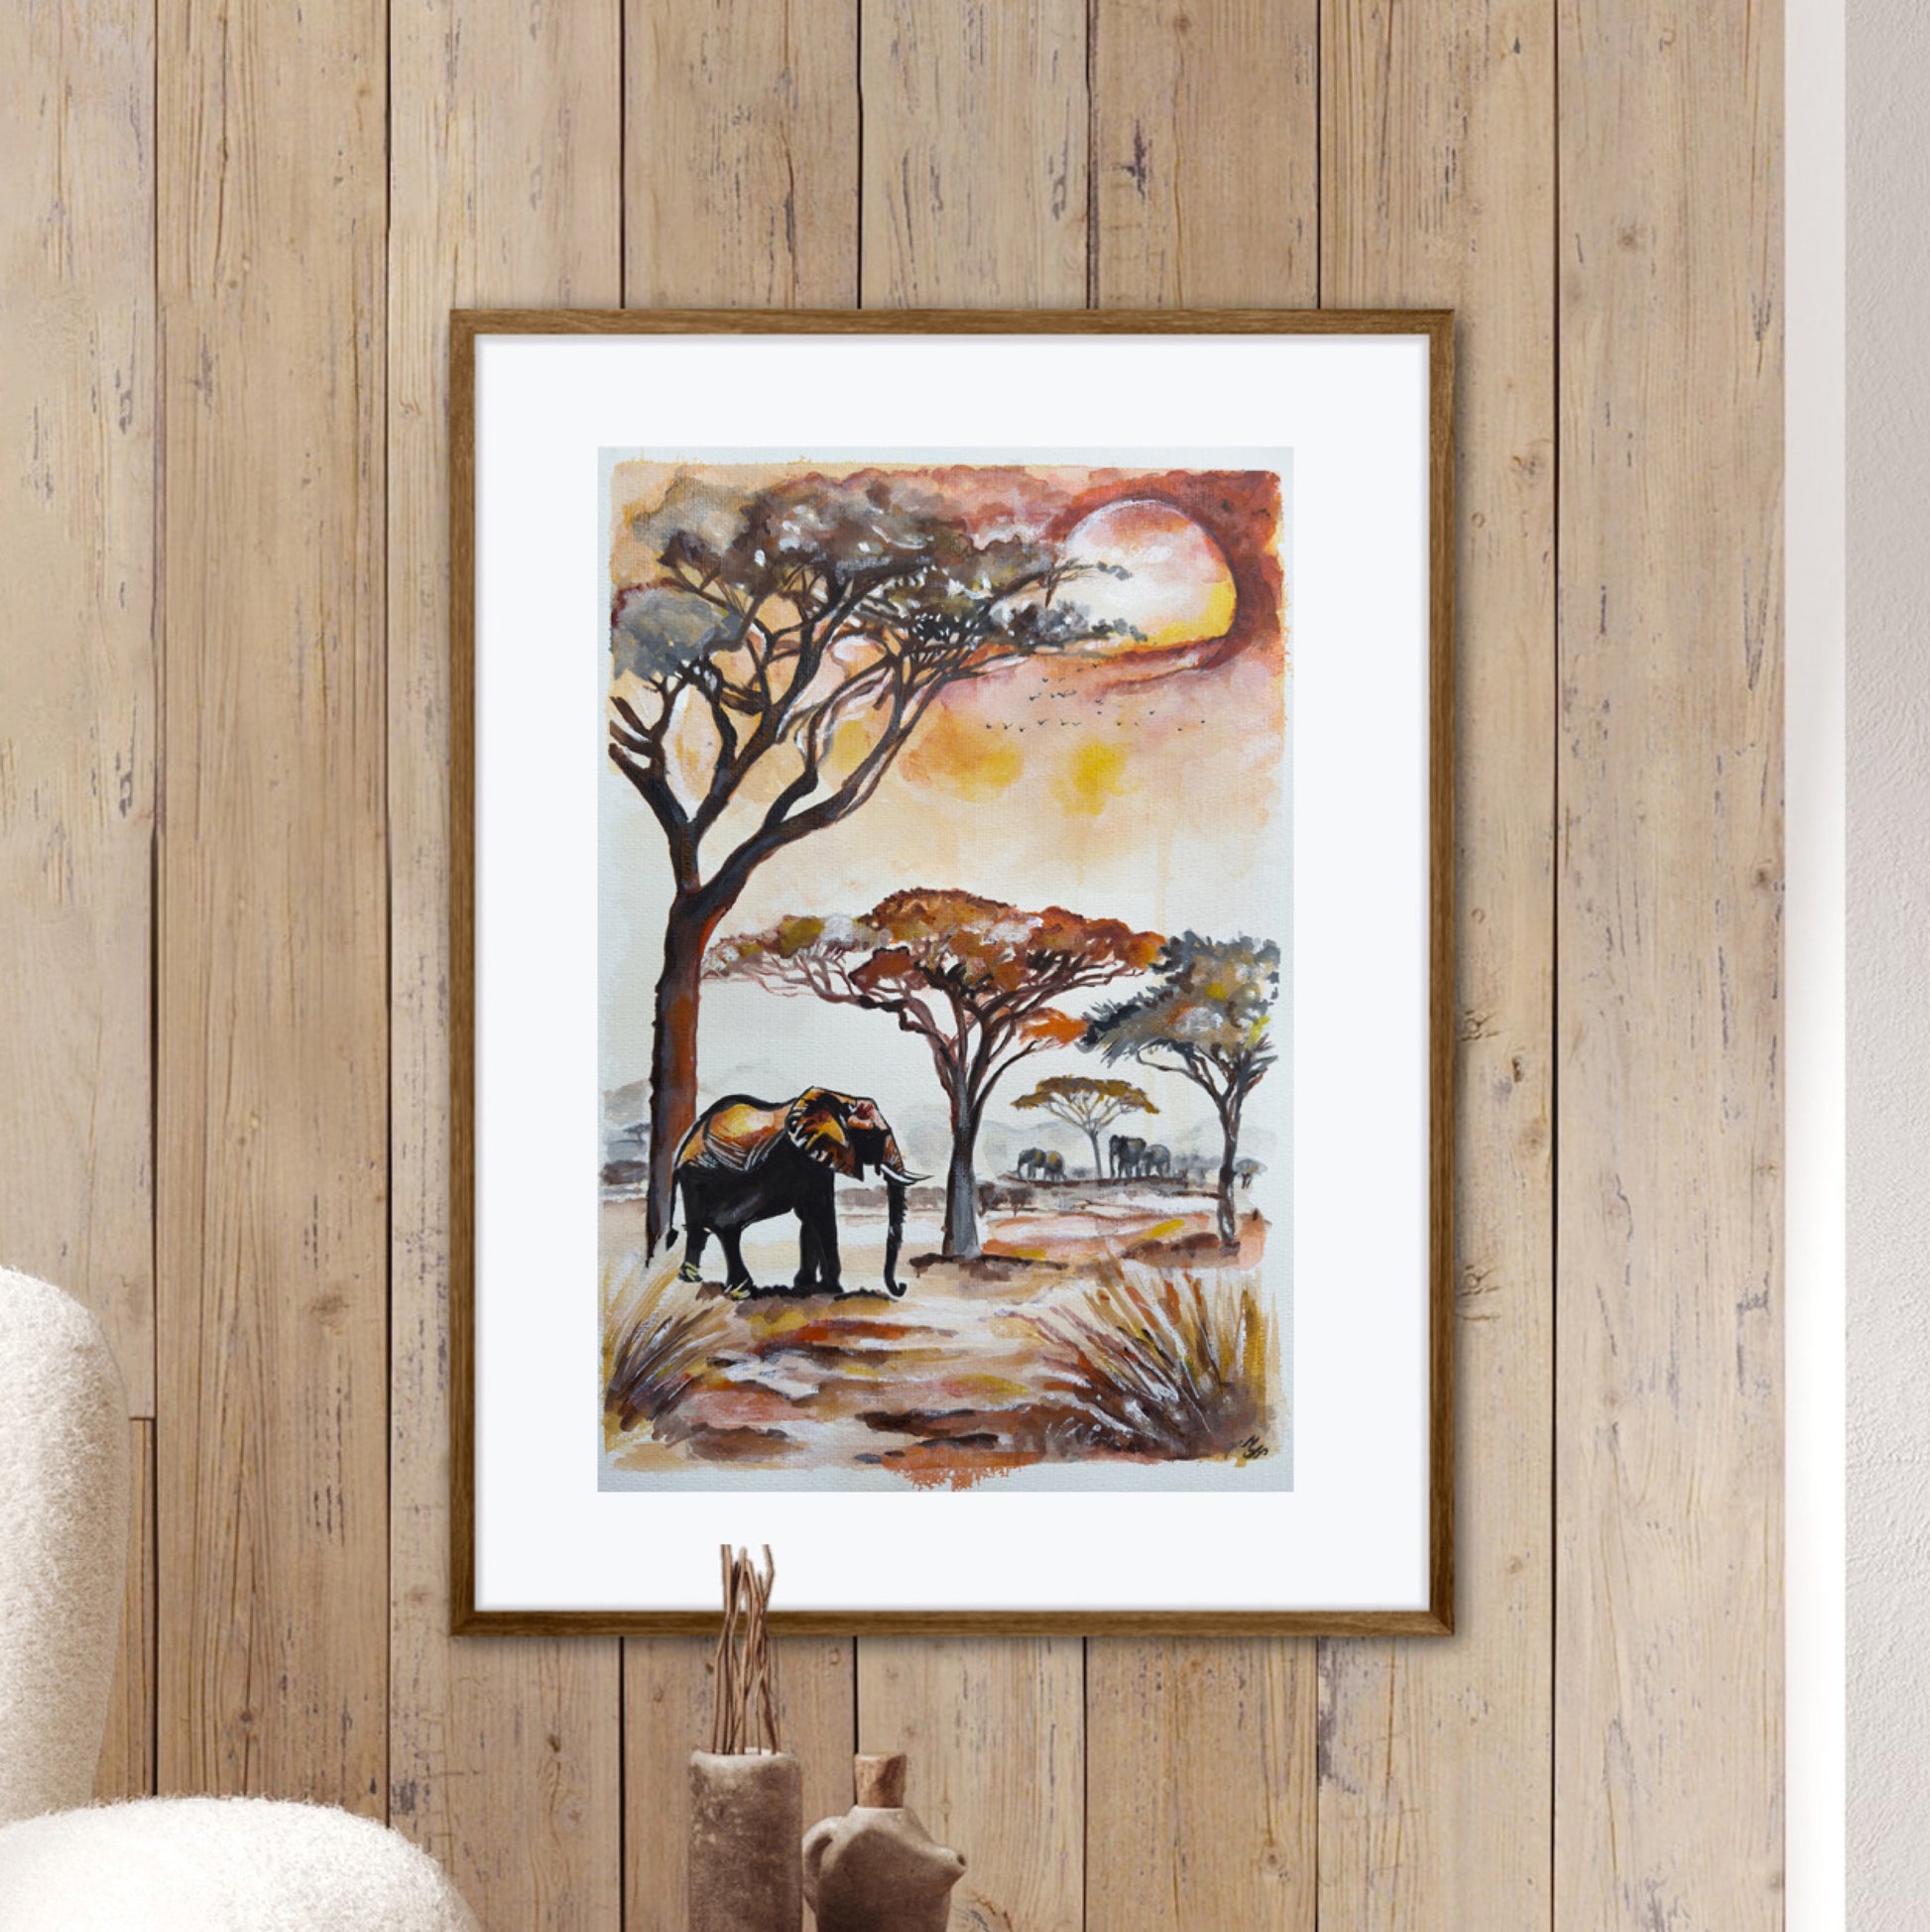 Dynamic composition capturing the warmth and beauty of an evening safari.